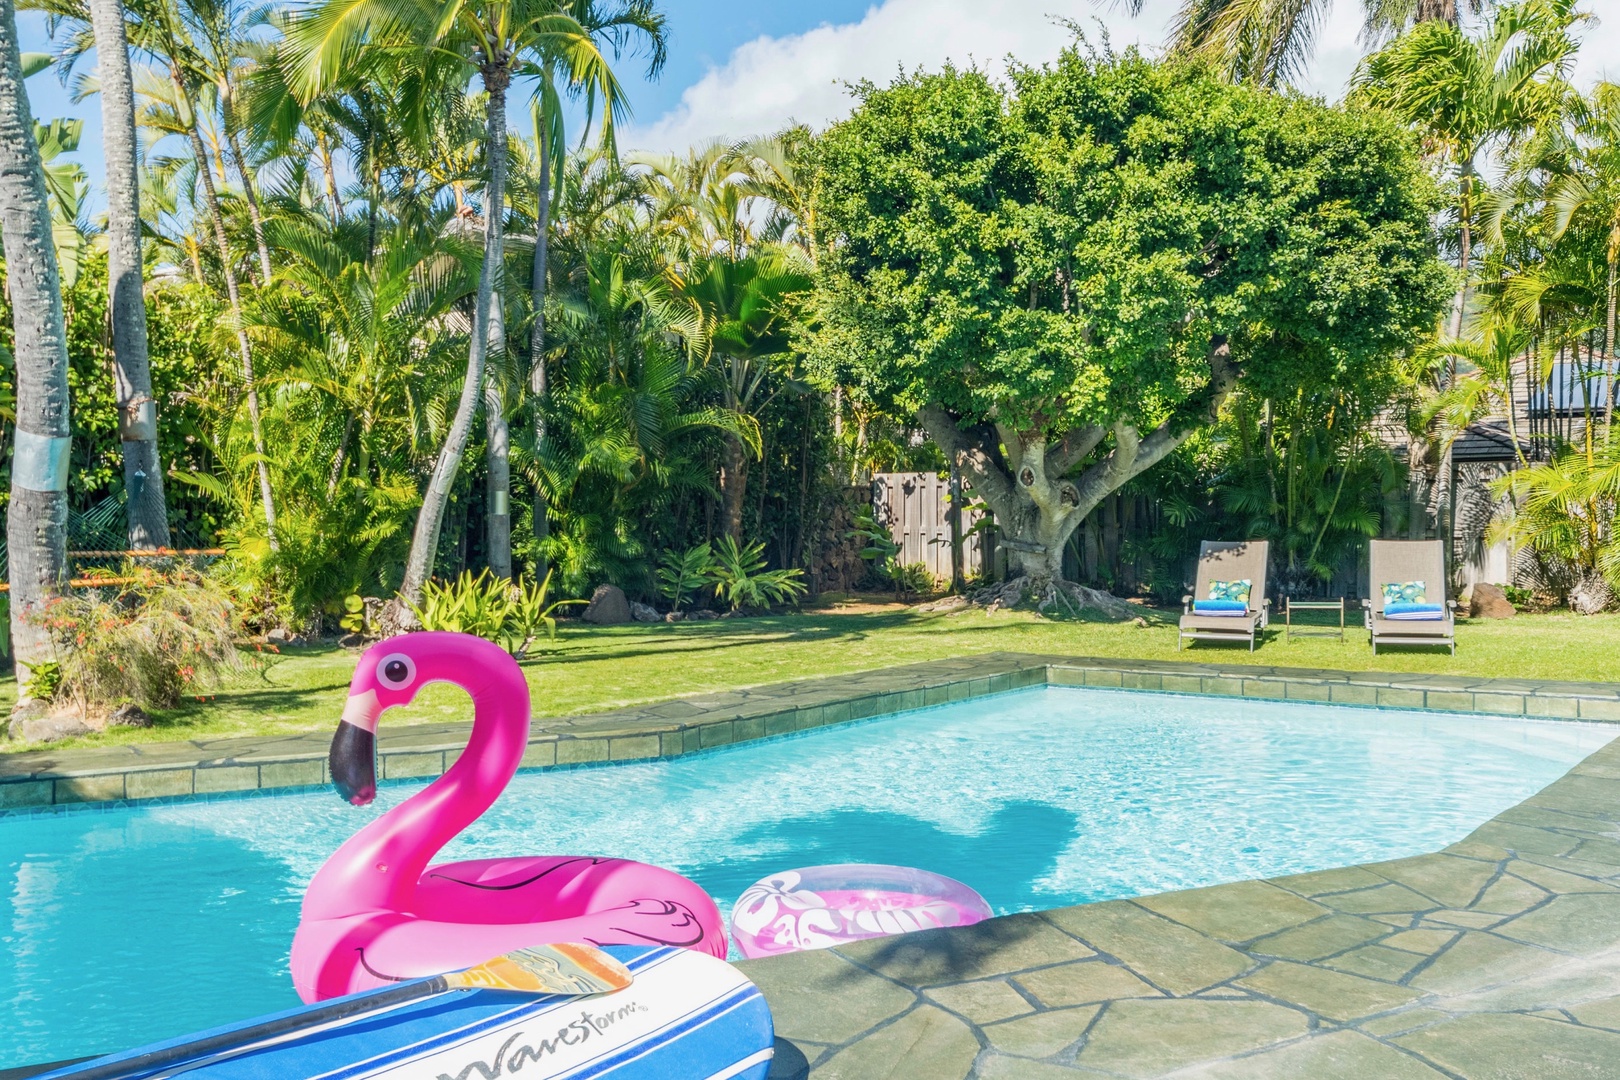 Honolulu Vacation Rentals, Hale Niuiki - Dive into tropical bliss with sun-kissed pool days and playful flamingo floats amidst lush greenery.